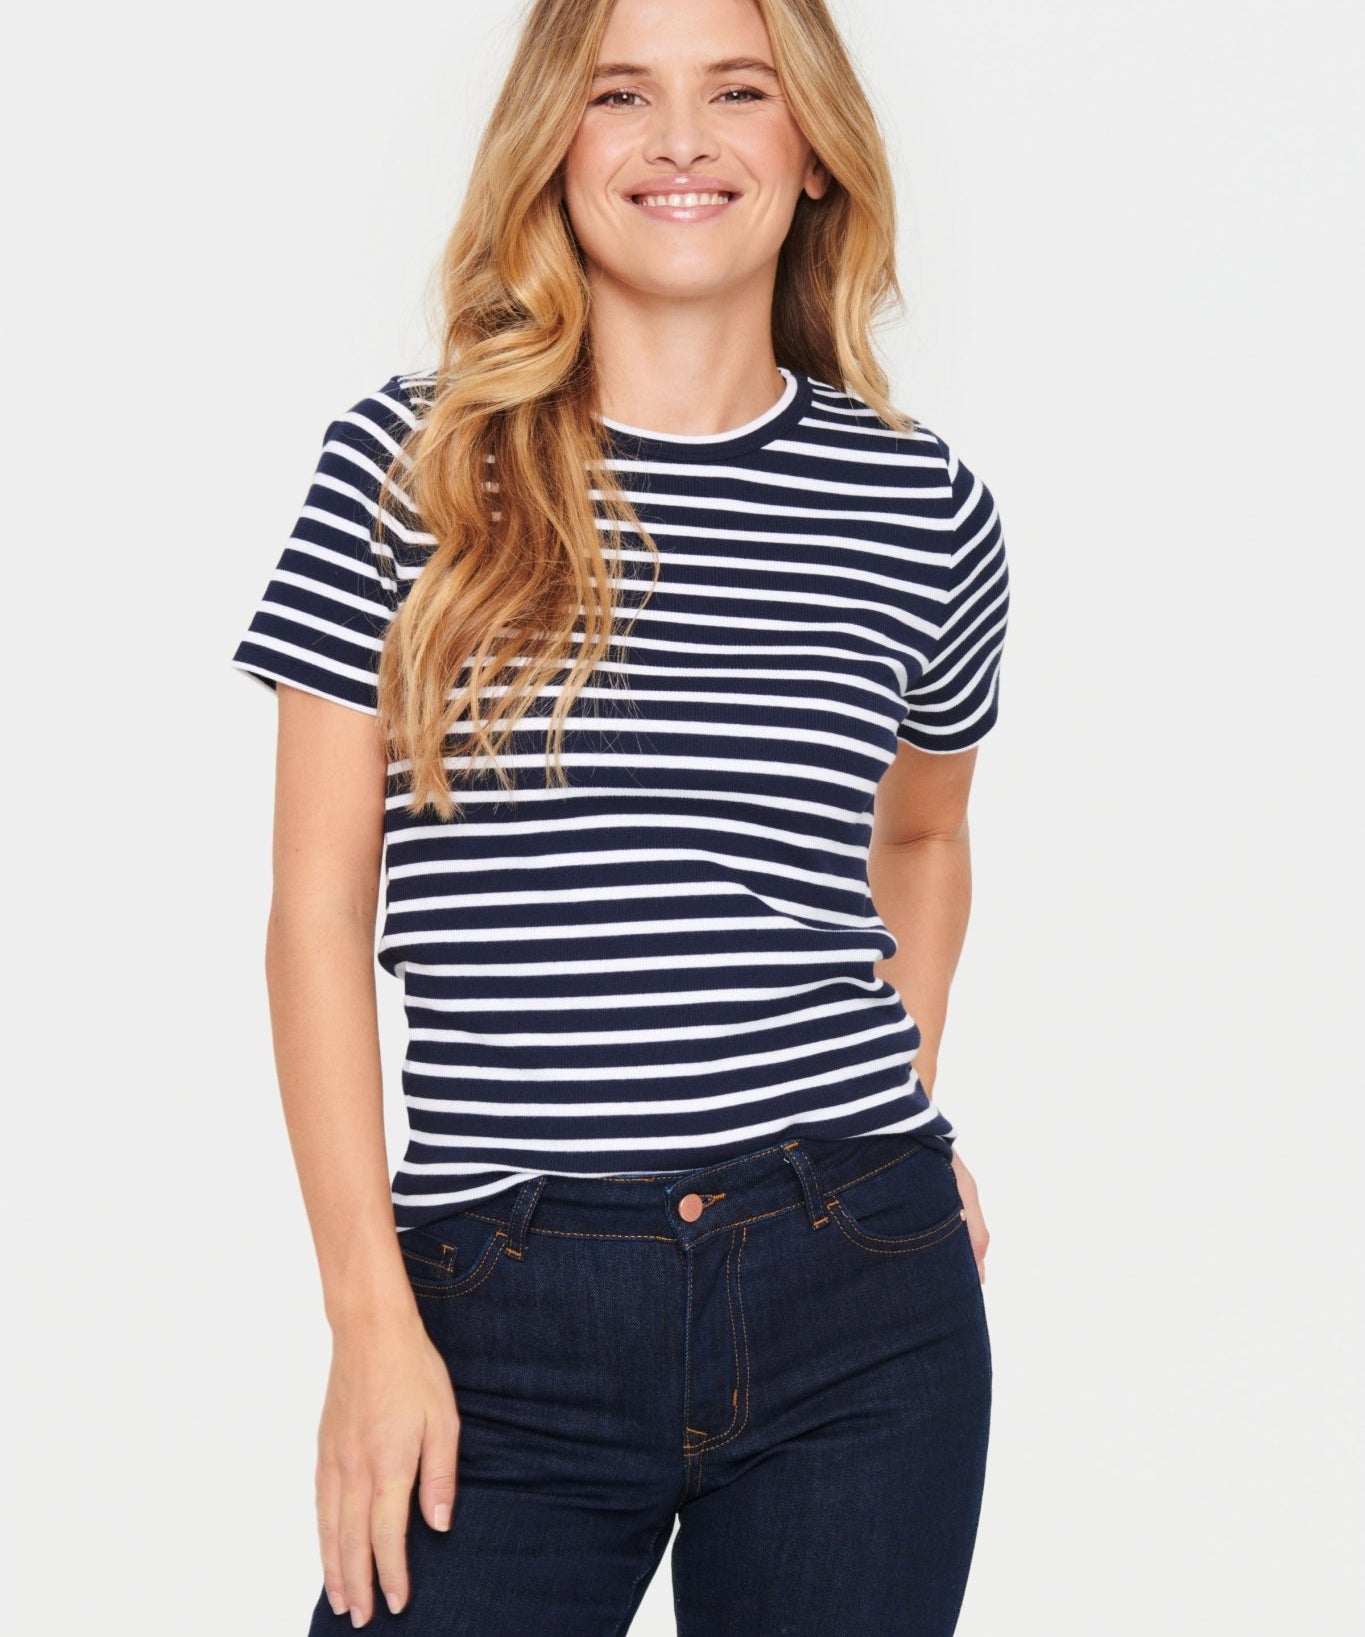 Aster Striped Tee by Saint Tropez - Blue Sky Fashions & Lingerie